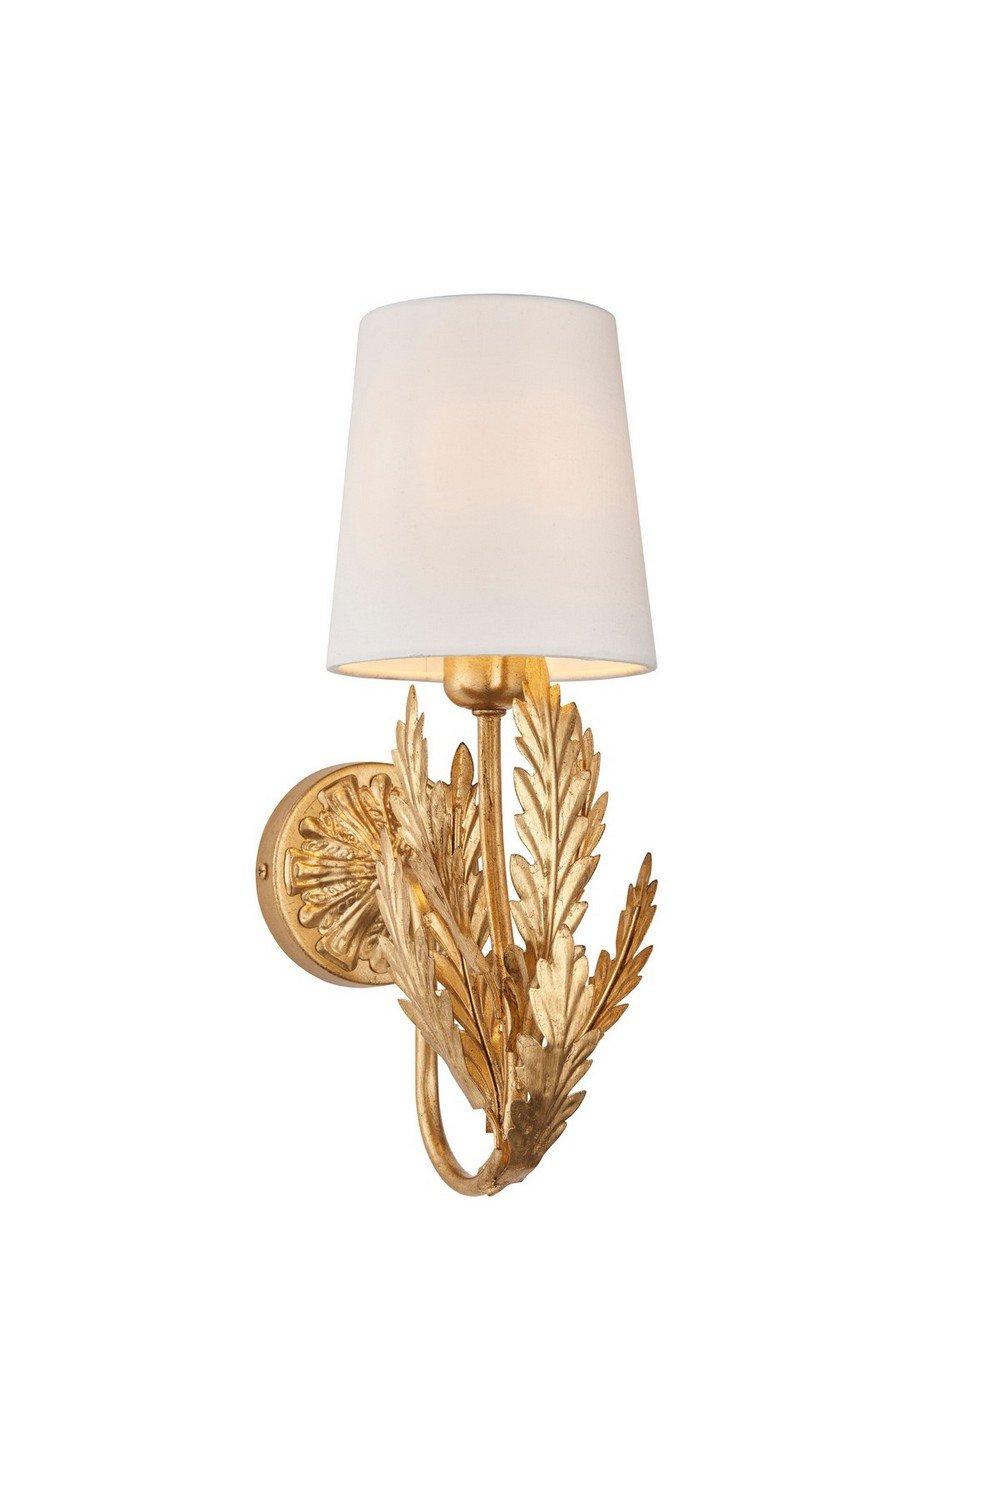 Delphine Decorative Gold Layered Leaf Wall Lamp with Ivory Fabric Shades